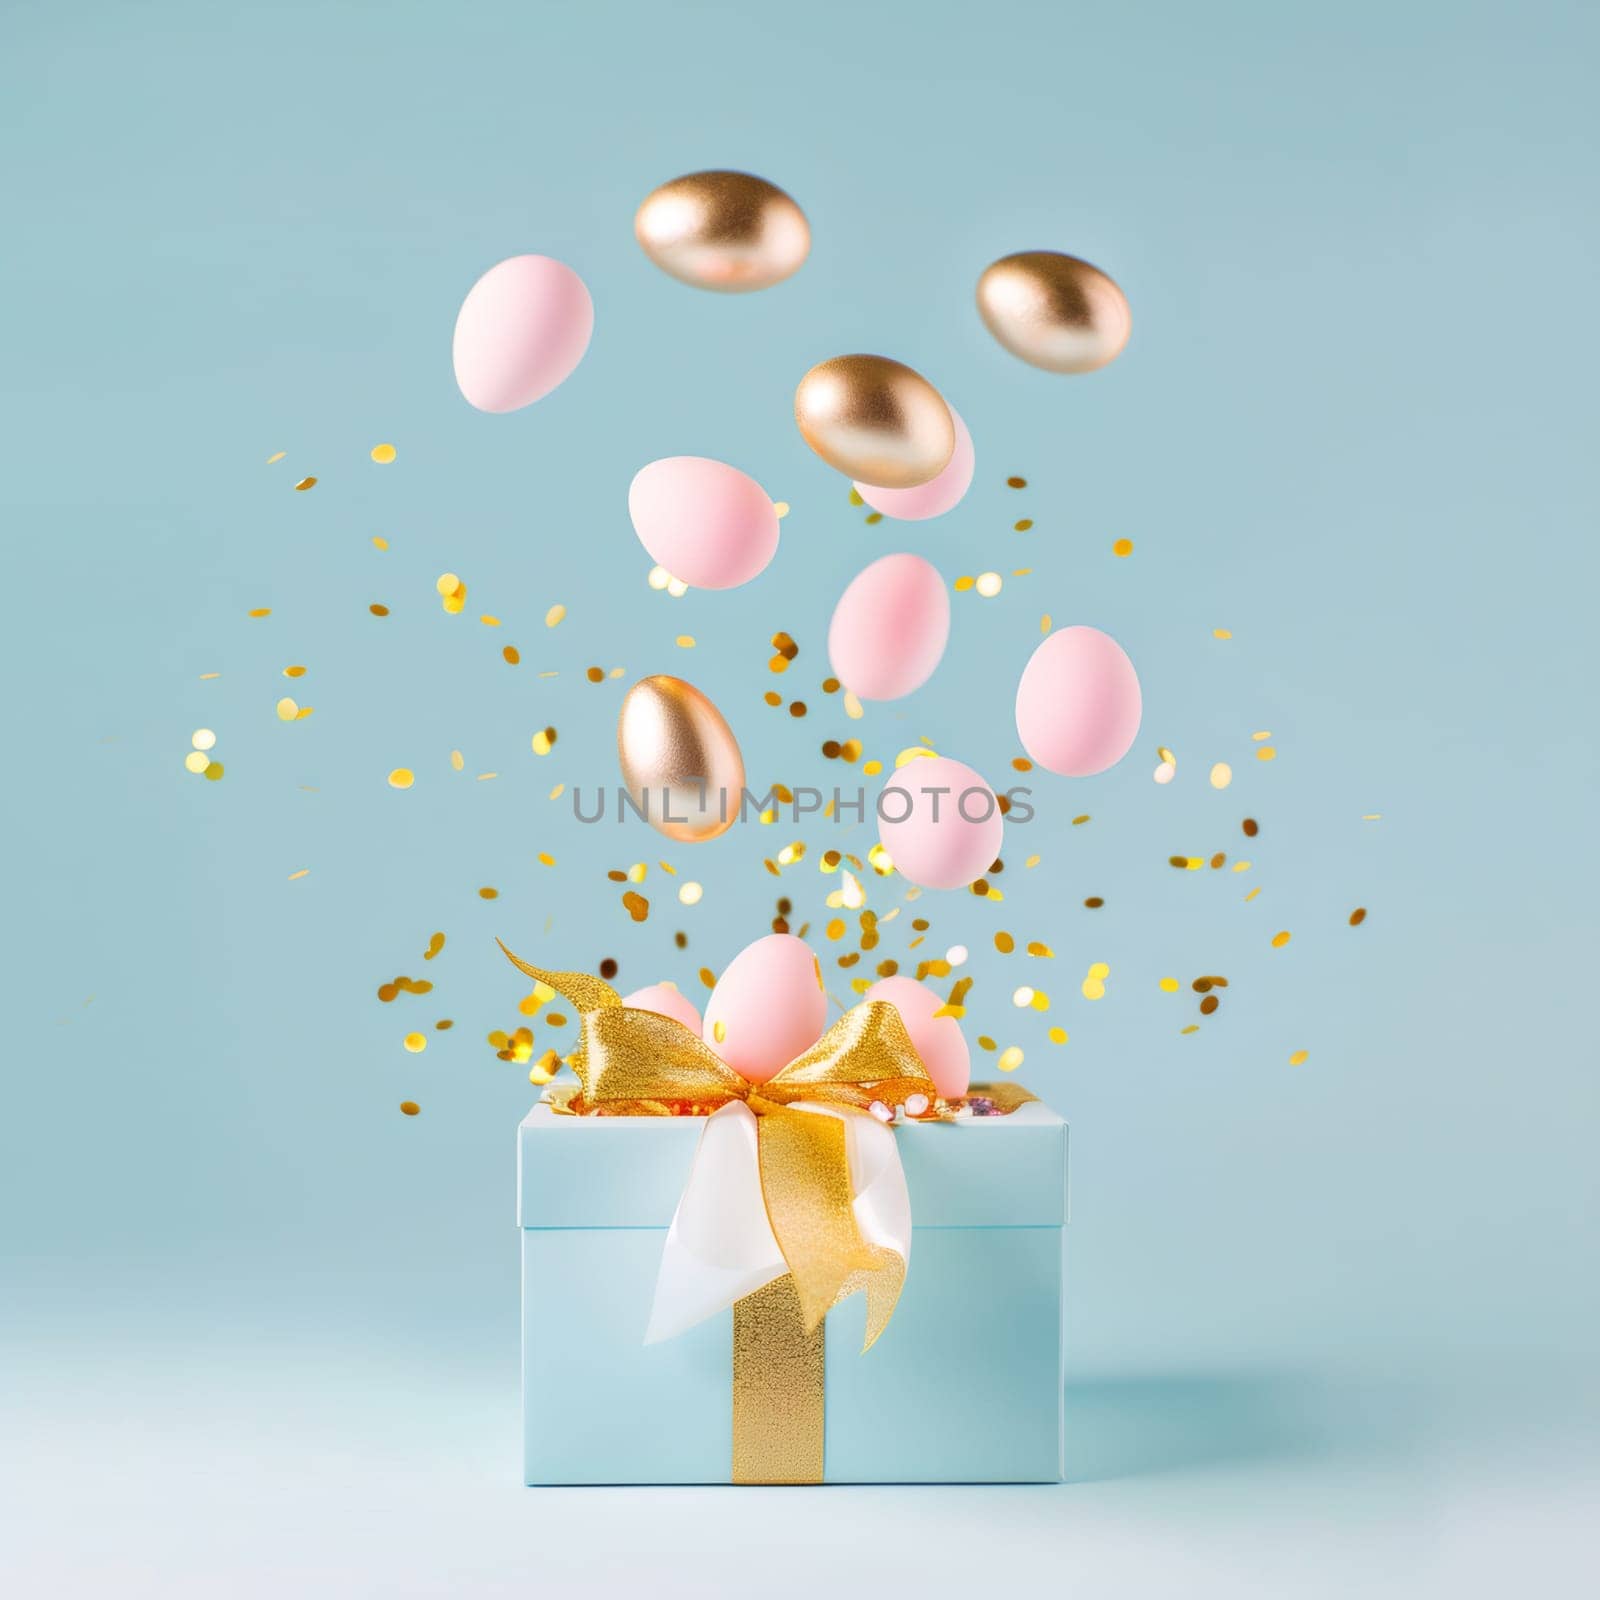 Falling pink and gold Easter eggs with shiny confetti in a gift box with a ribbon bow standing on a light blue background, side view close-up.